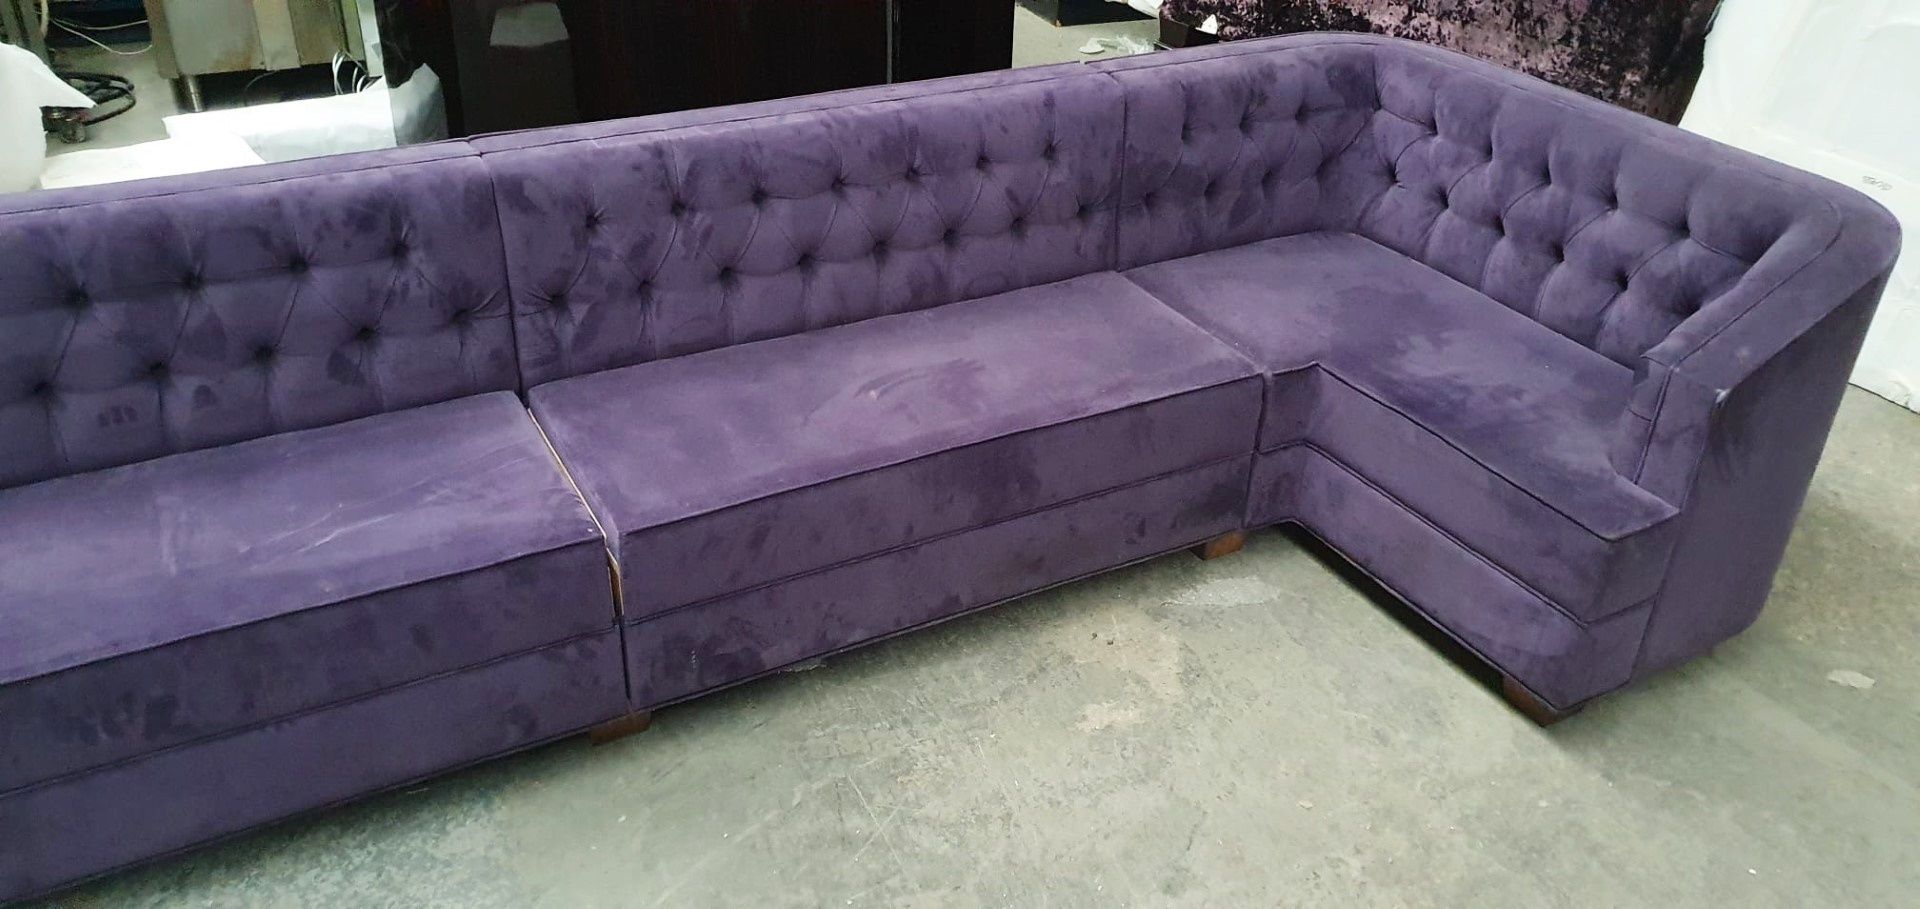 5.2-Metres Of Commercial Sofa Seating, Upholstered In A Premium Purple Fabric - Ref: G/IT - CL815 - Image 2 of 6